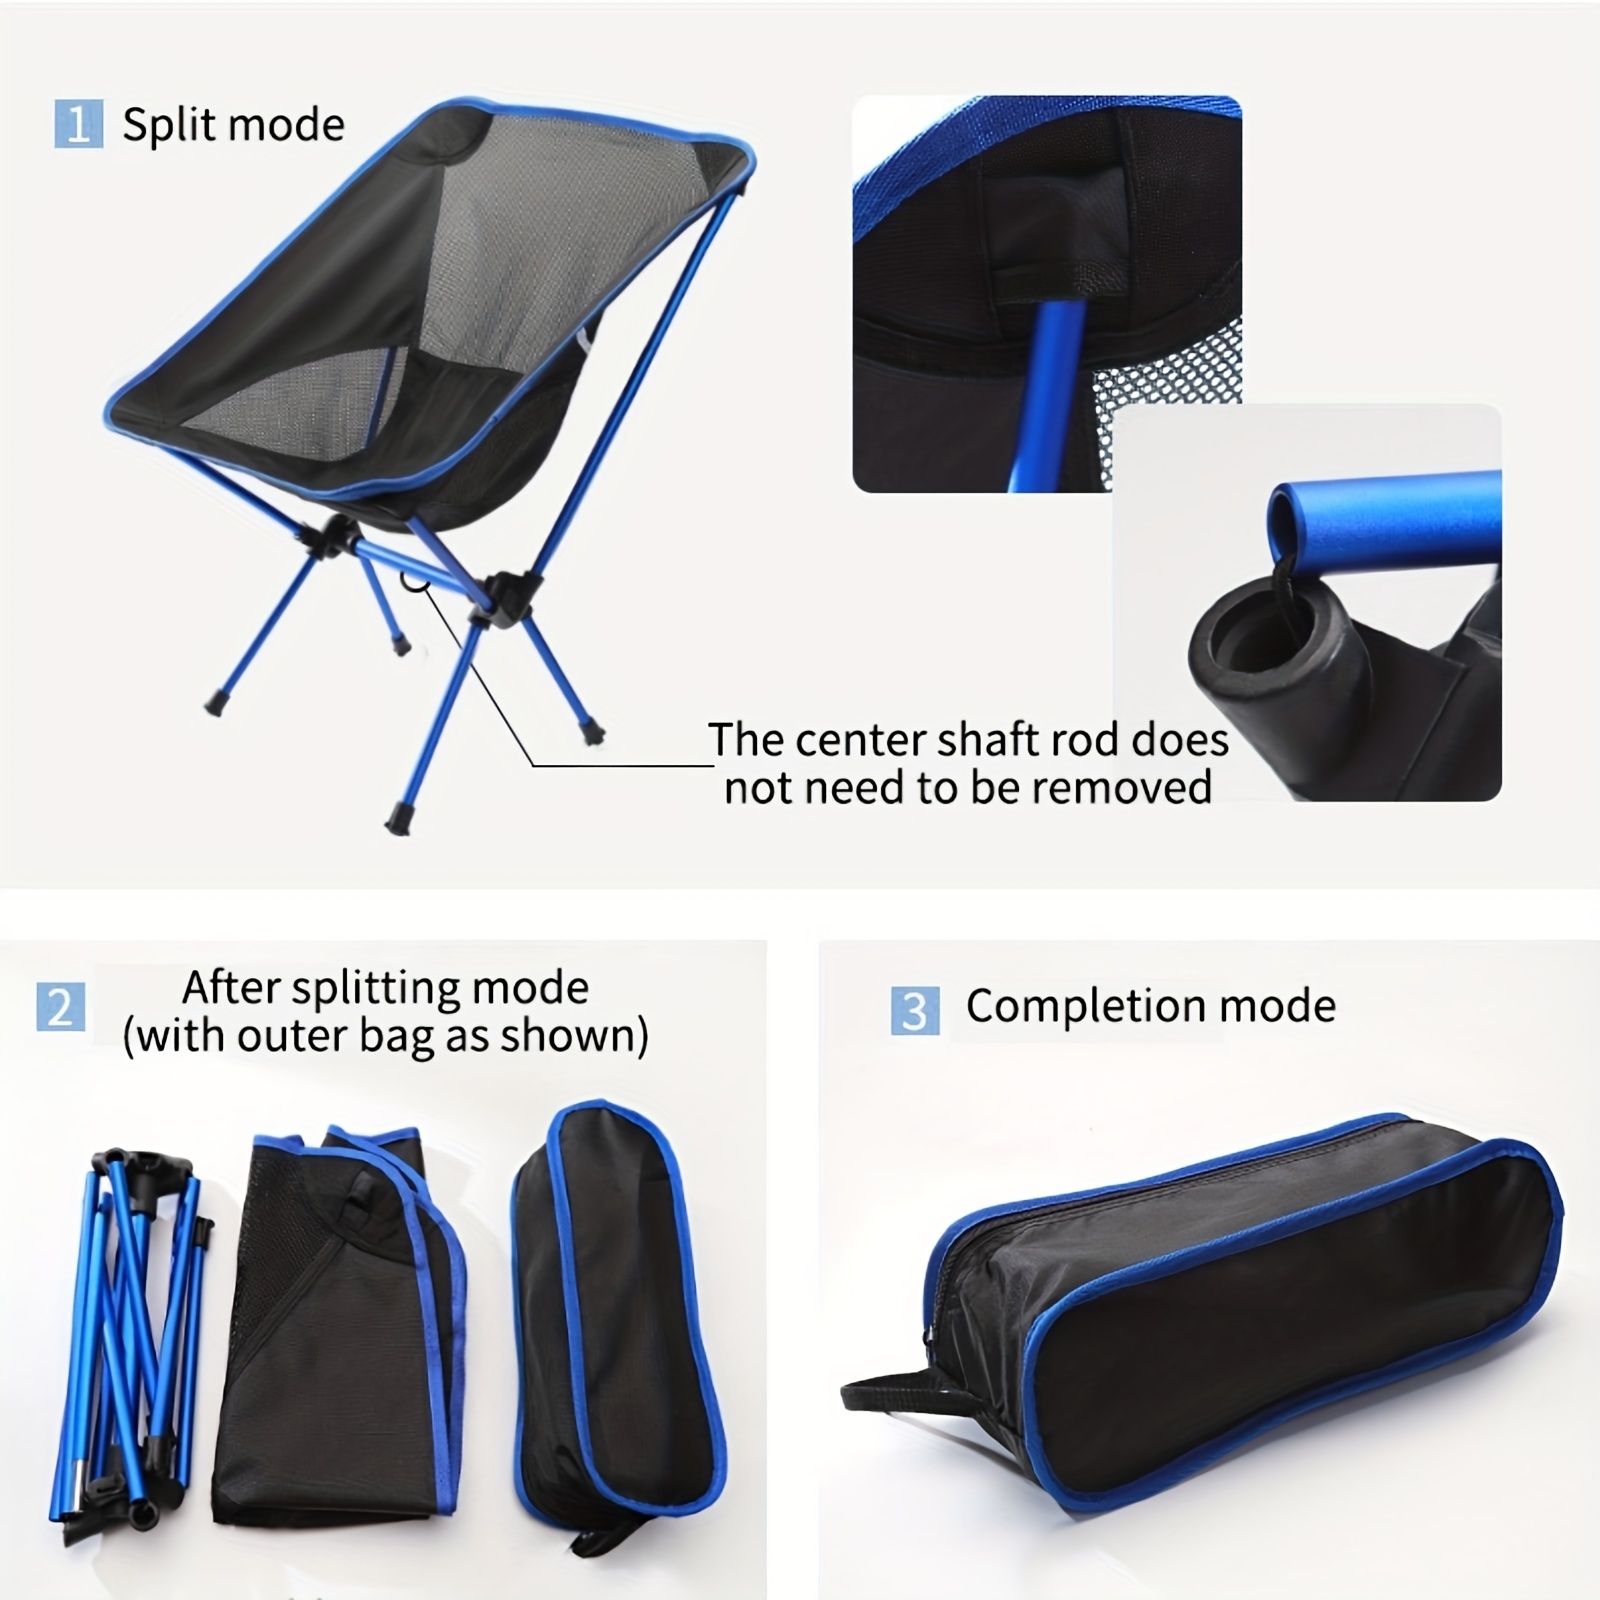 Outdoor Moon Chairs Folding Camping Barbecue Leisure Fishing Chair Lawn  Chair with Elastic Side Pockets, Lightweight Portable Compact 260 lb Load  Comfortable Outdoors Camping Hiking 